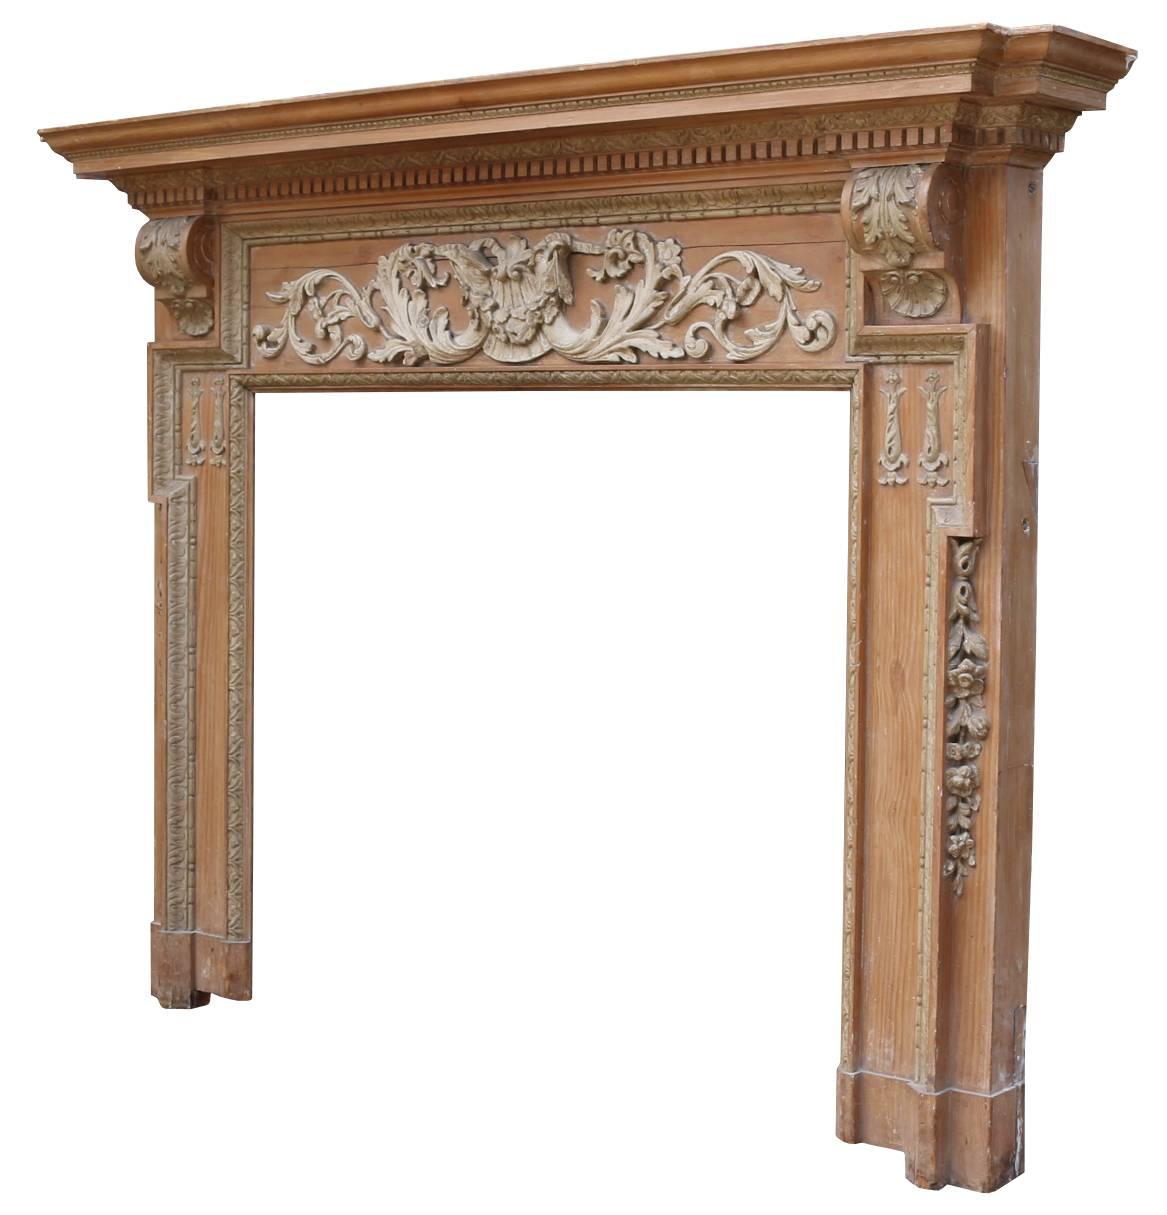 This fire surround has been stripped of paint and varnish/wax finish.

Opening height 98.5cm
Opening width 112cm
Width between legs 158.5cm.